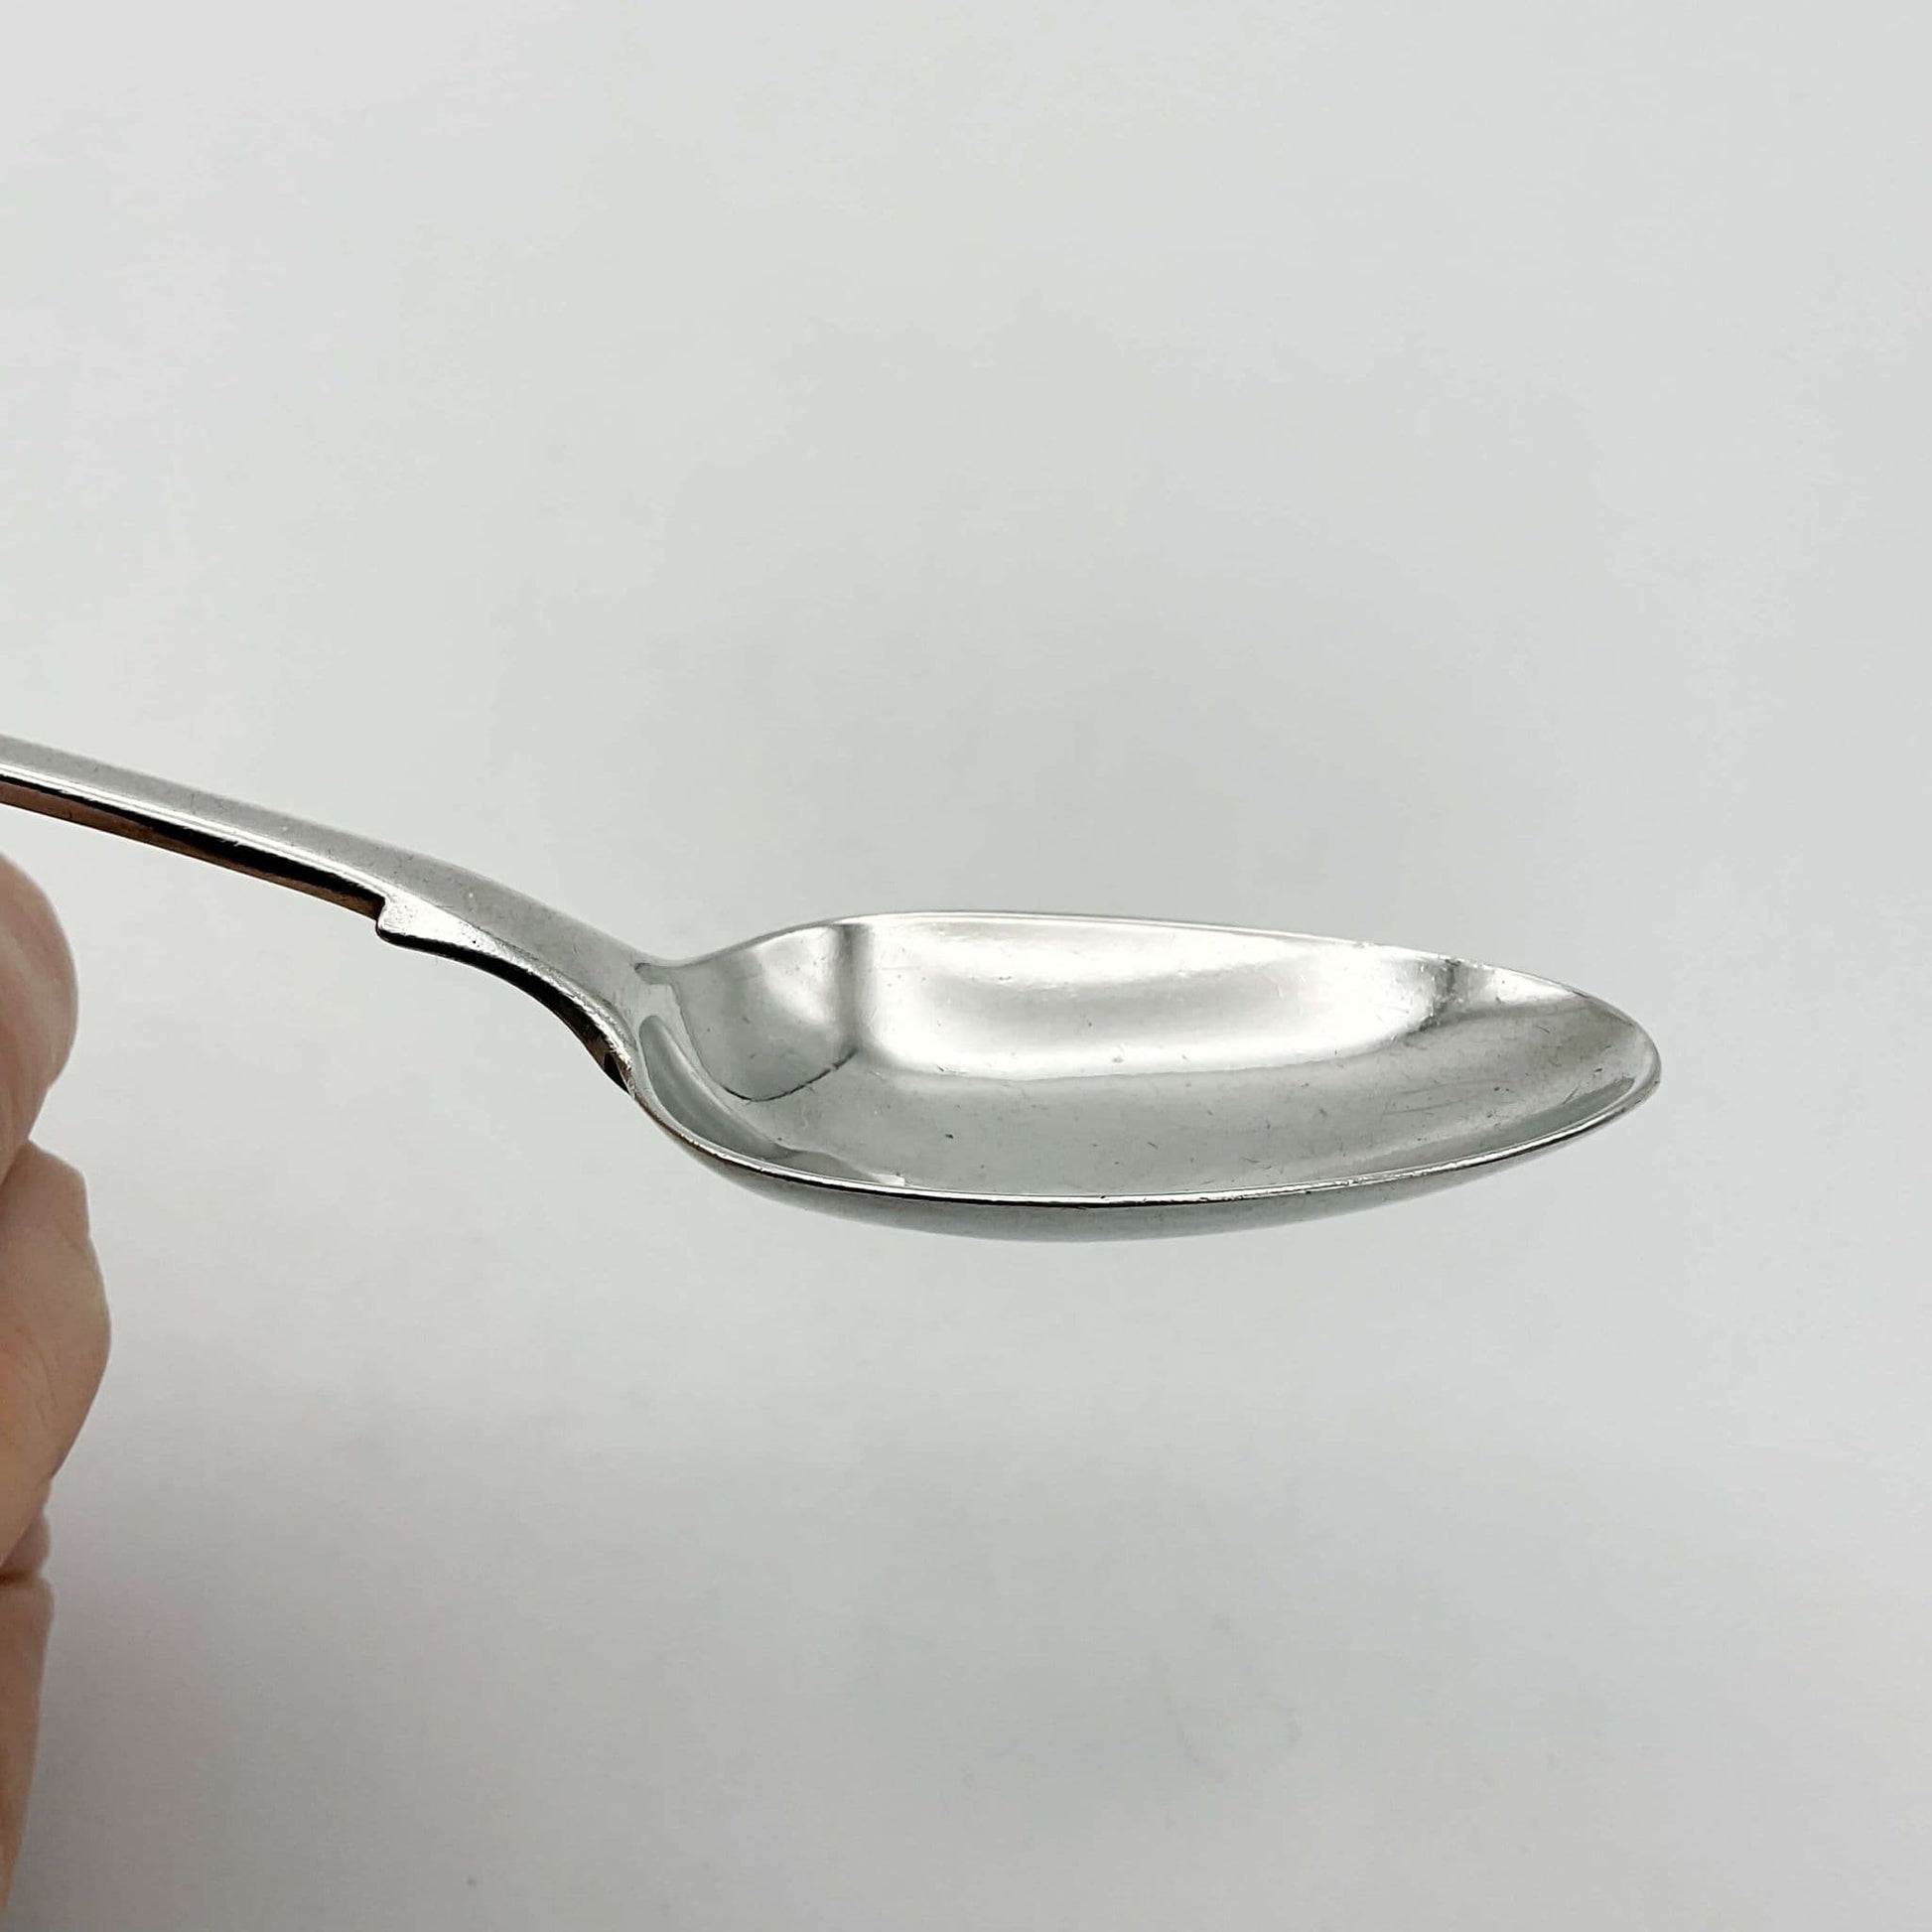 Bowl of an antique silver teaspoon with a white background